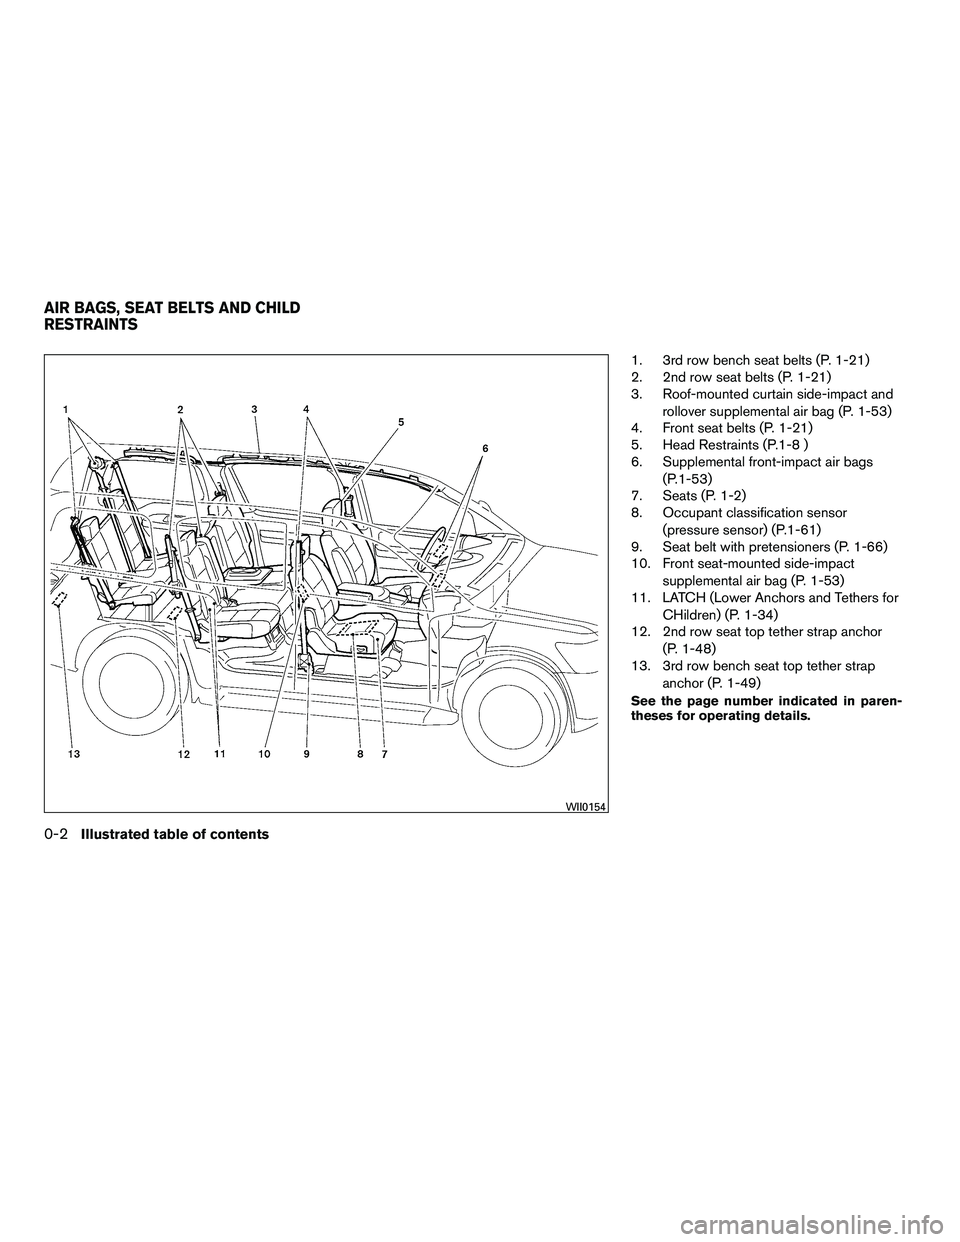 NISSAN ARMADA 2010  Owners Manual 1. 3rd row bench seat belts (P. 1-21)
2. 2nd row seat belts (P. 1-21)
3. Roof-mounted curtain side-impact androllover supplemental air bag (P. 1-53)
4. Front seat belts (P. 1-21)
5. Head Restraints (P